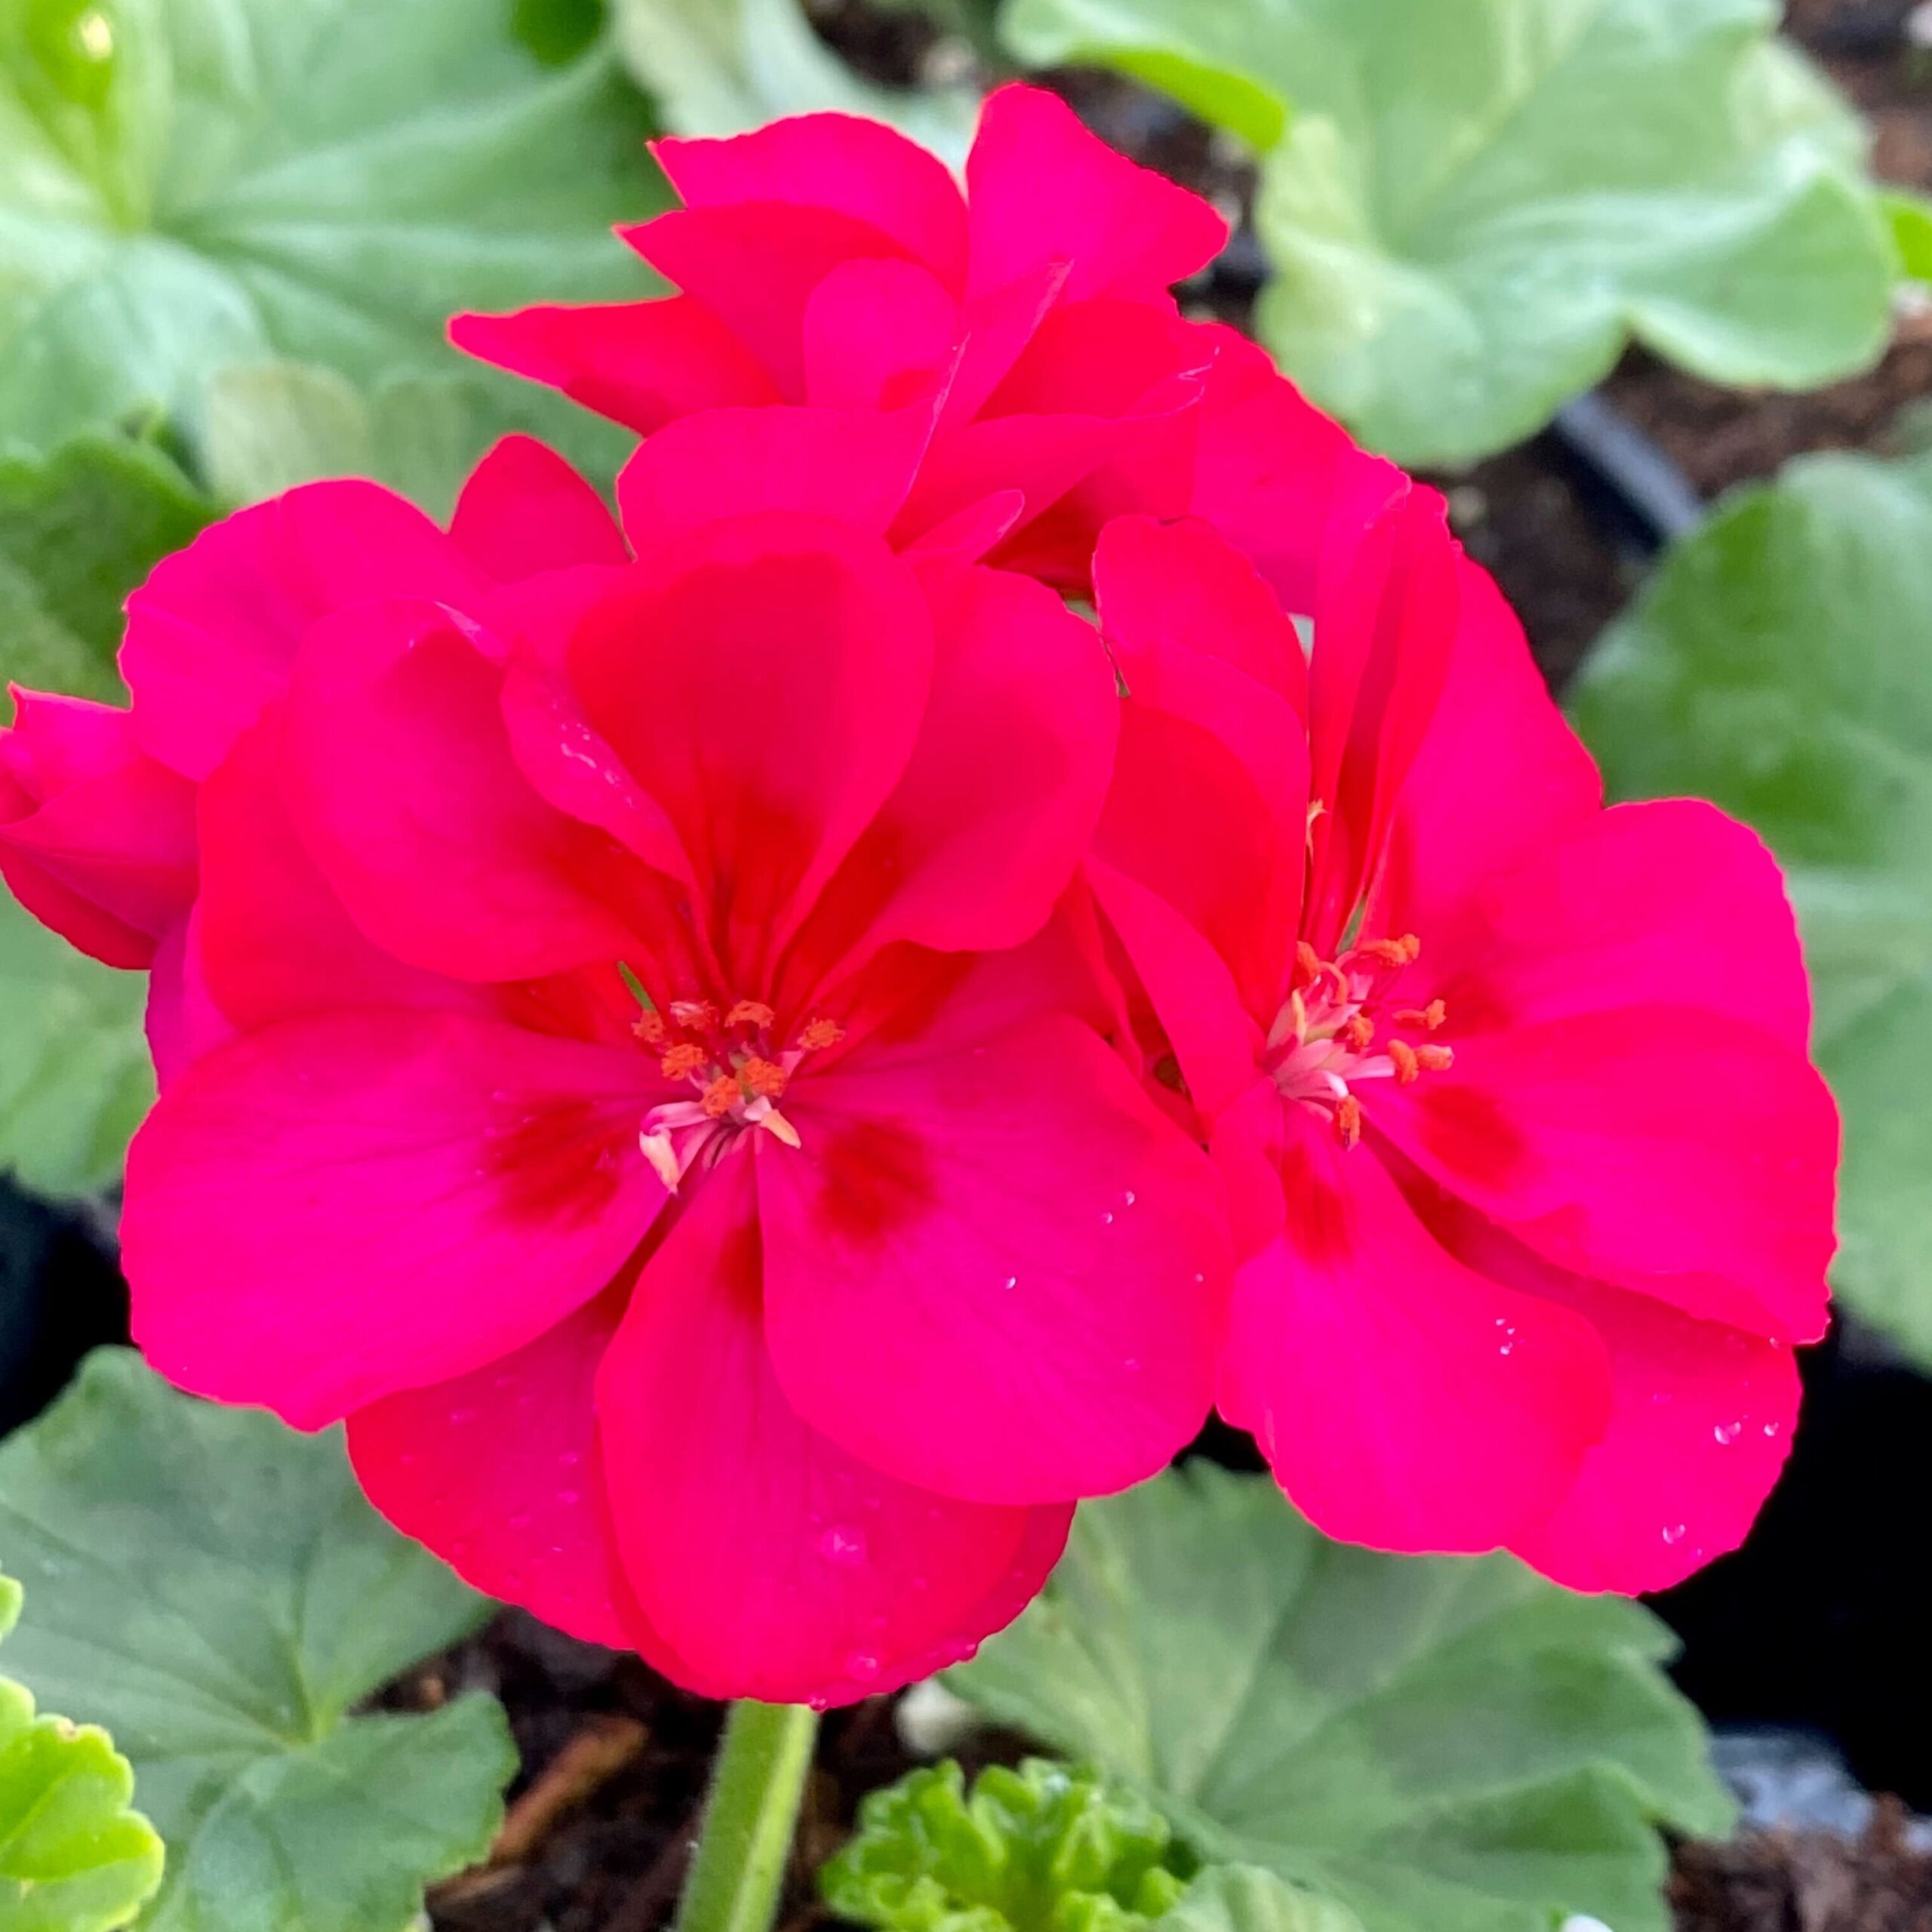 2022 Greenstreet Growers Wholesale Availability Landscaping Finished Annuals Dynamo Geranium Hot Pink